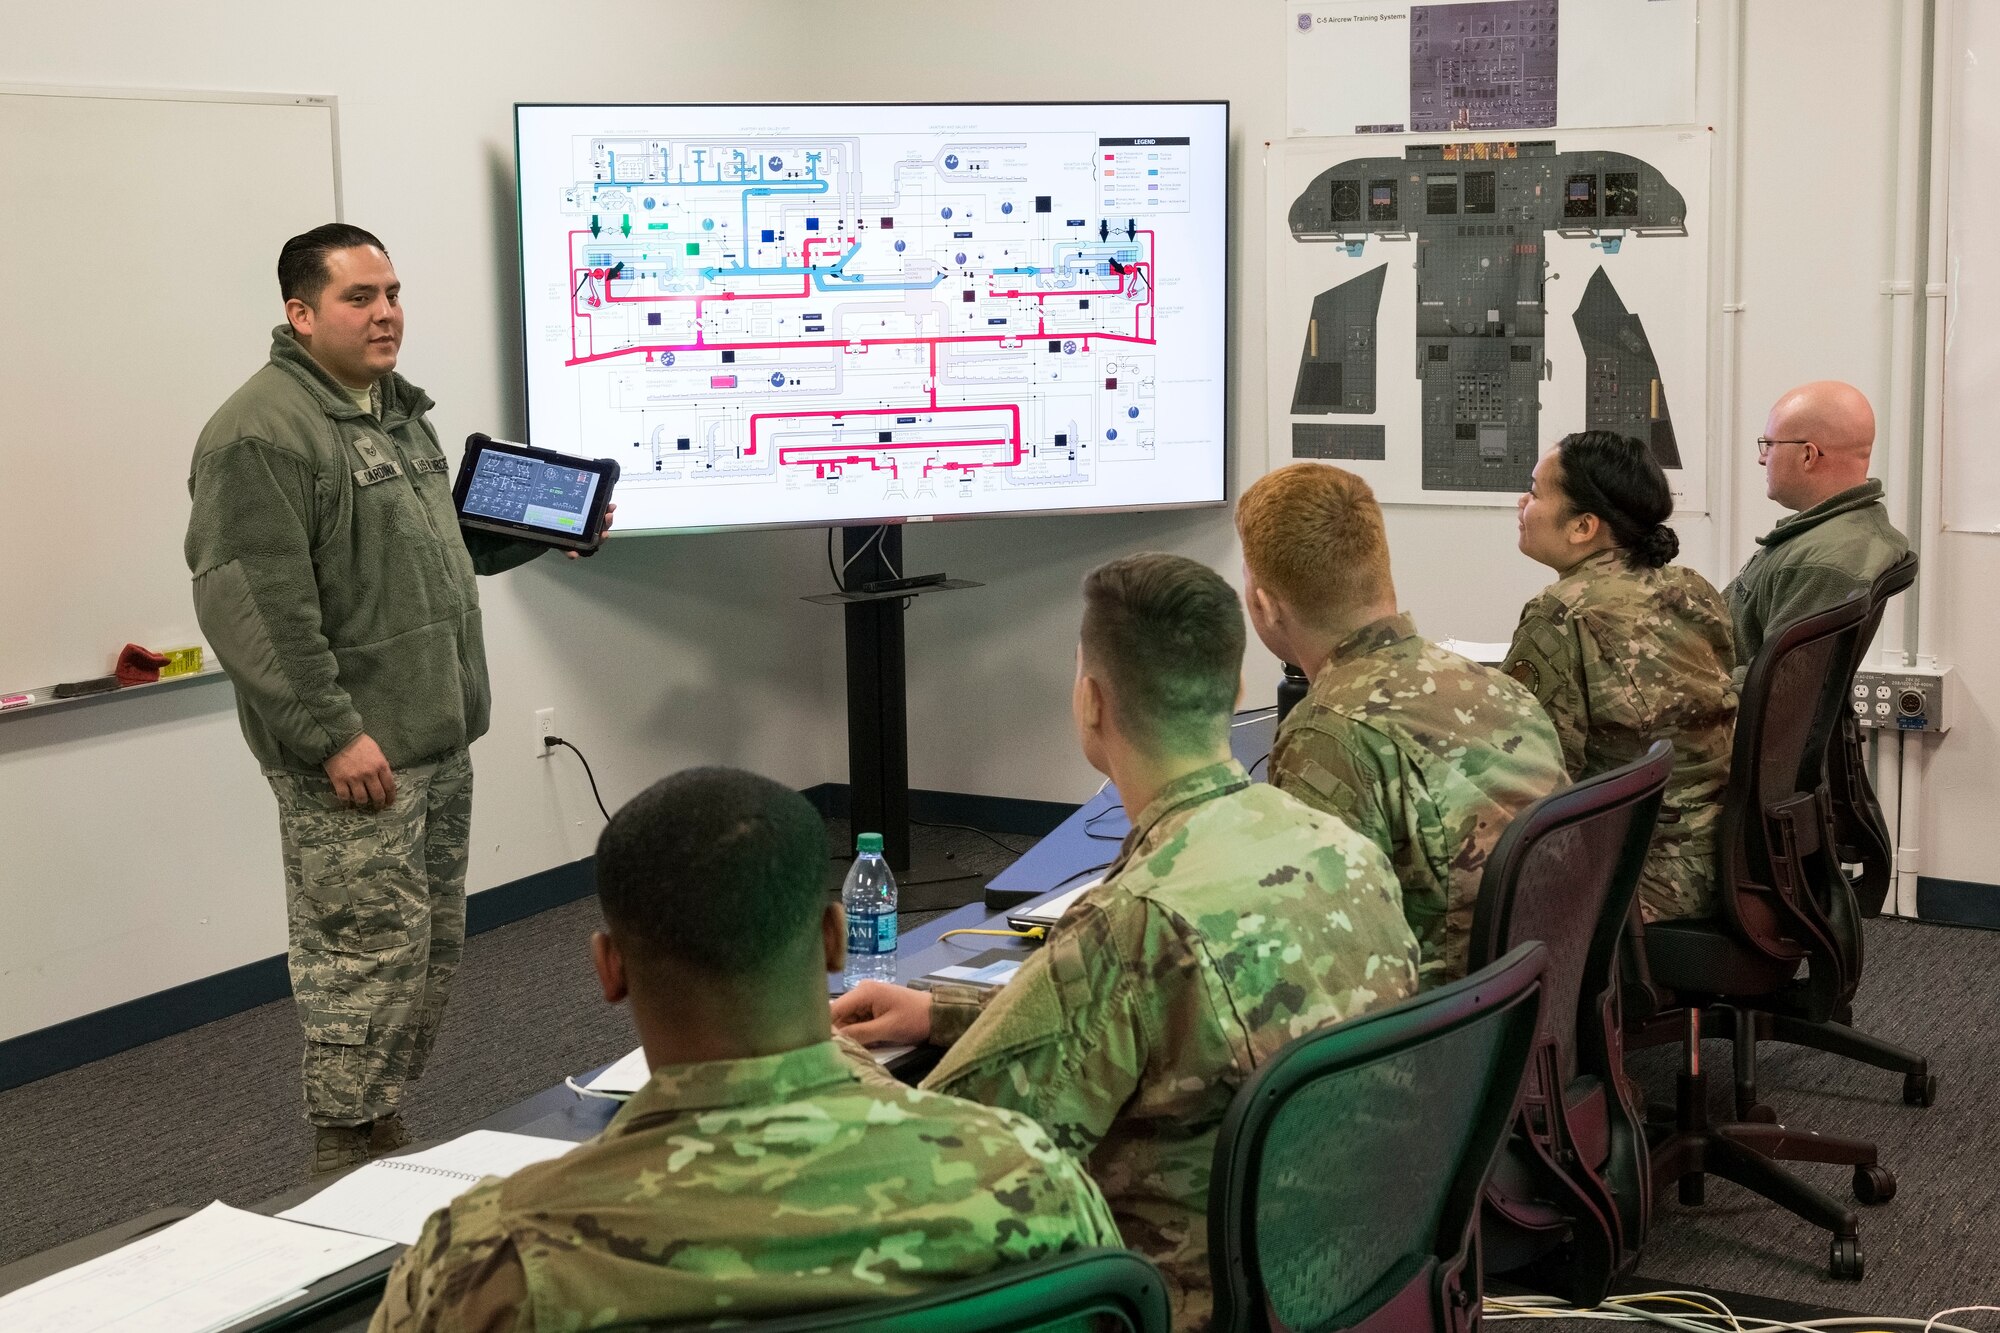 Students watch as Staff Sgt. Jose Cardona, 373rd Training Squadron, Detachment 3, C-5M Electrical and Environmental Systems instructor, uses the Interactive Multimedia Instruction tablet for the C-5 Air Conditioning and Pressurization Systems Trainer in conjunction with an interactive schematic of the C-5M environmental and pressurization system Feb. 20, 2019, at the 373rd TRS, Det 3, on Dover Air Force Base, Del. The IMI and schematic allows Cardona to train students on the AC & PST by monitoring actions, inputting malfunctions and simulating on-the-ground or inflight scenarios. (U.S. Air Force photo by Roland Balik)